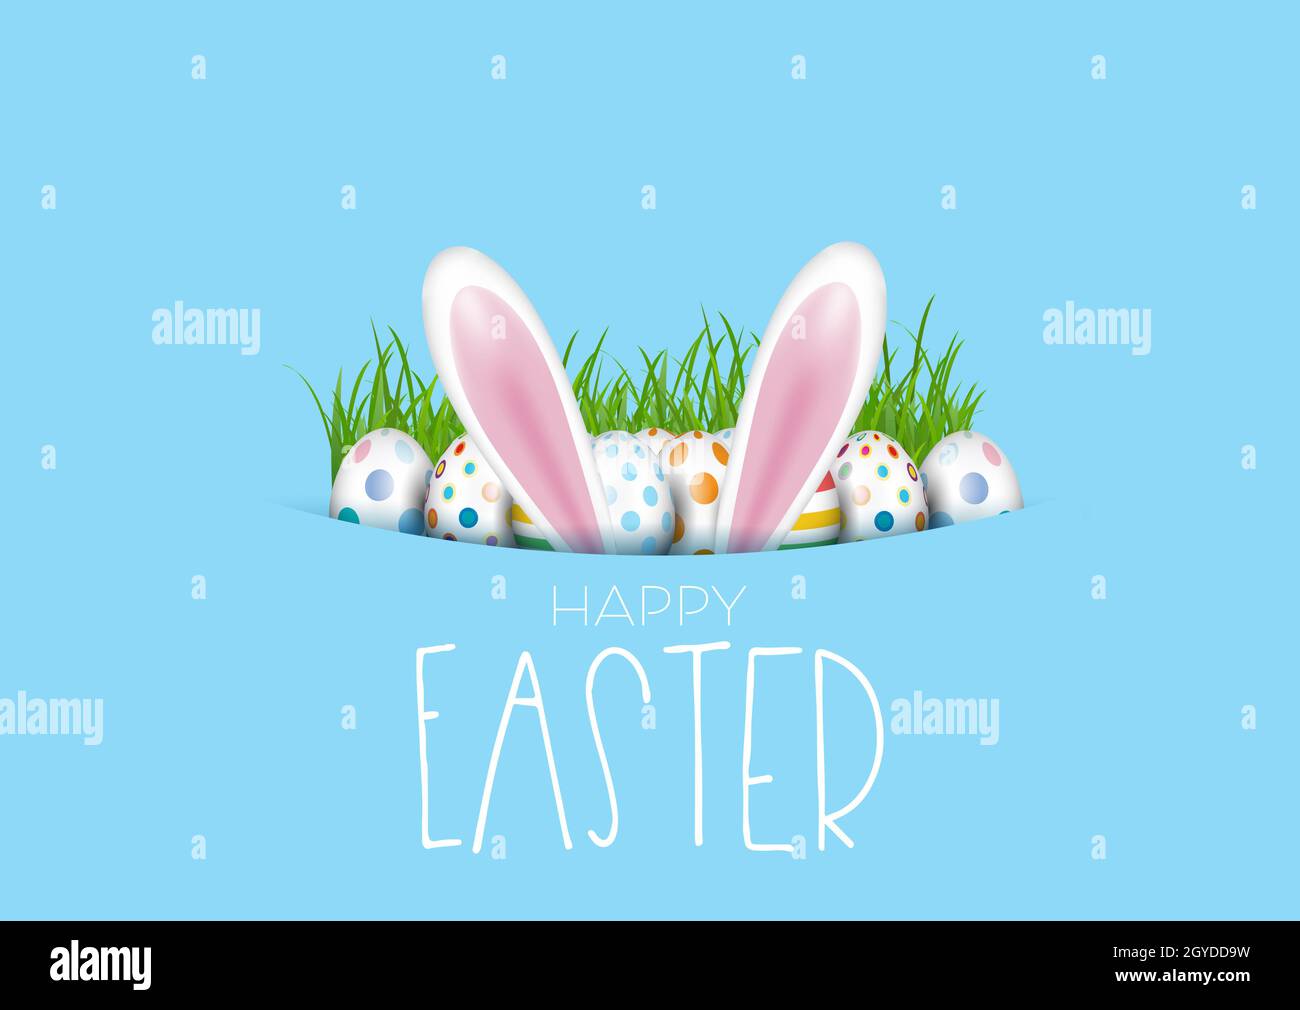 Easter egg and bunny ears background Stock Photo